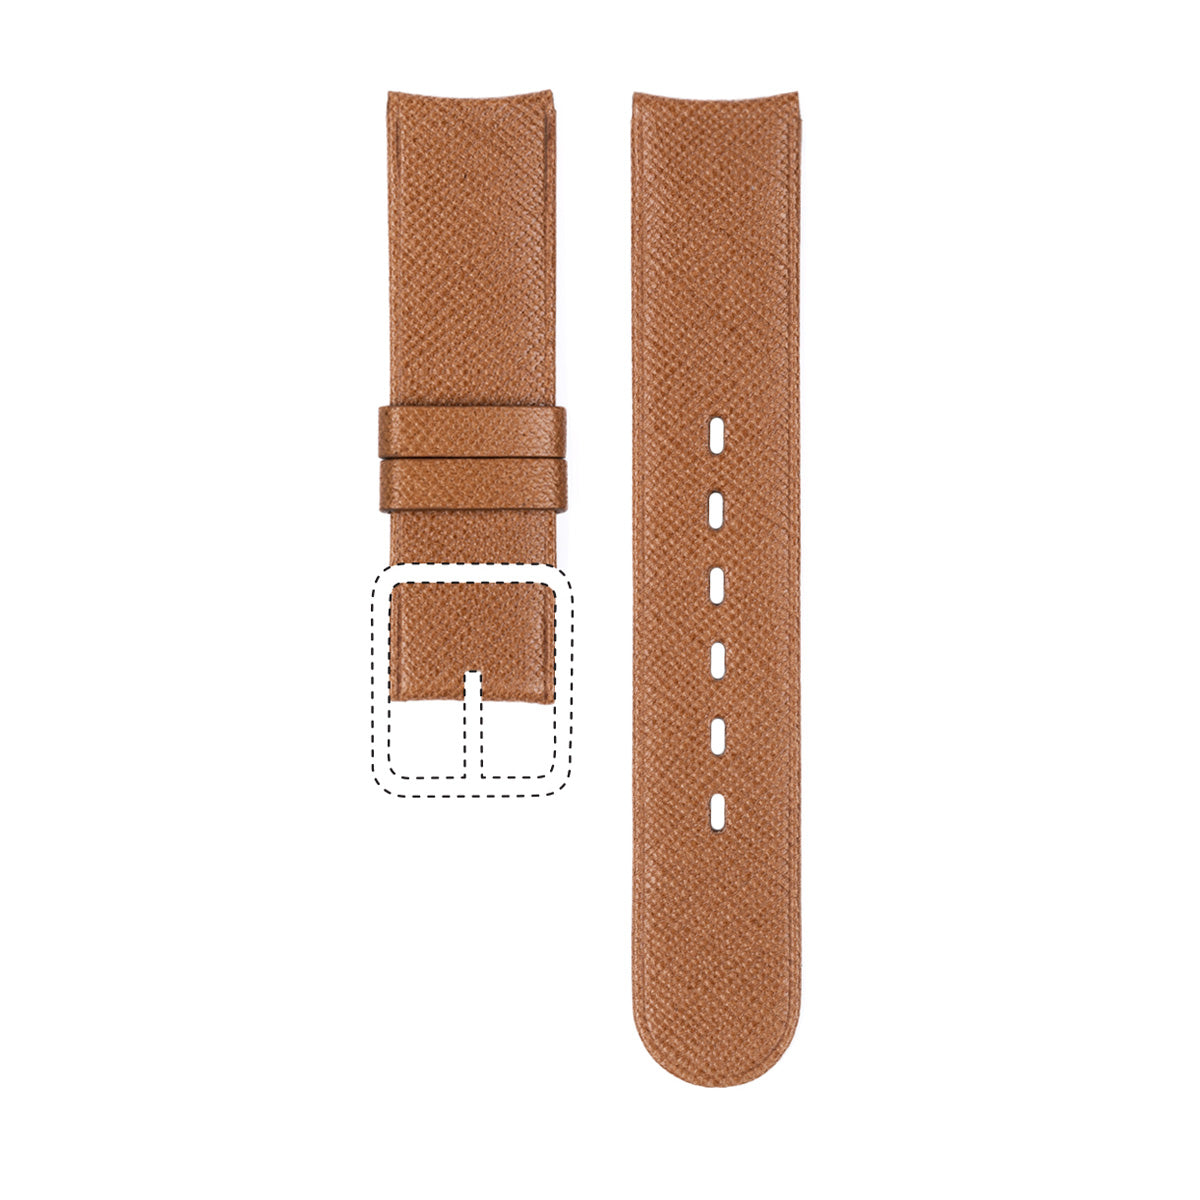 Textured Leather Strap for TYPE 1 and 8